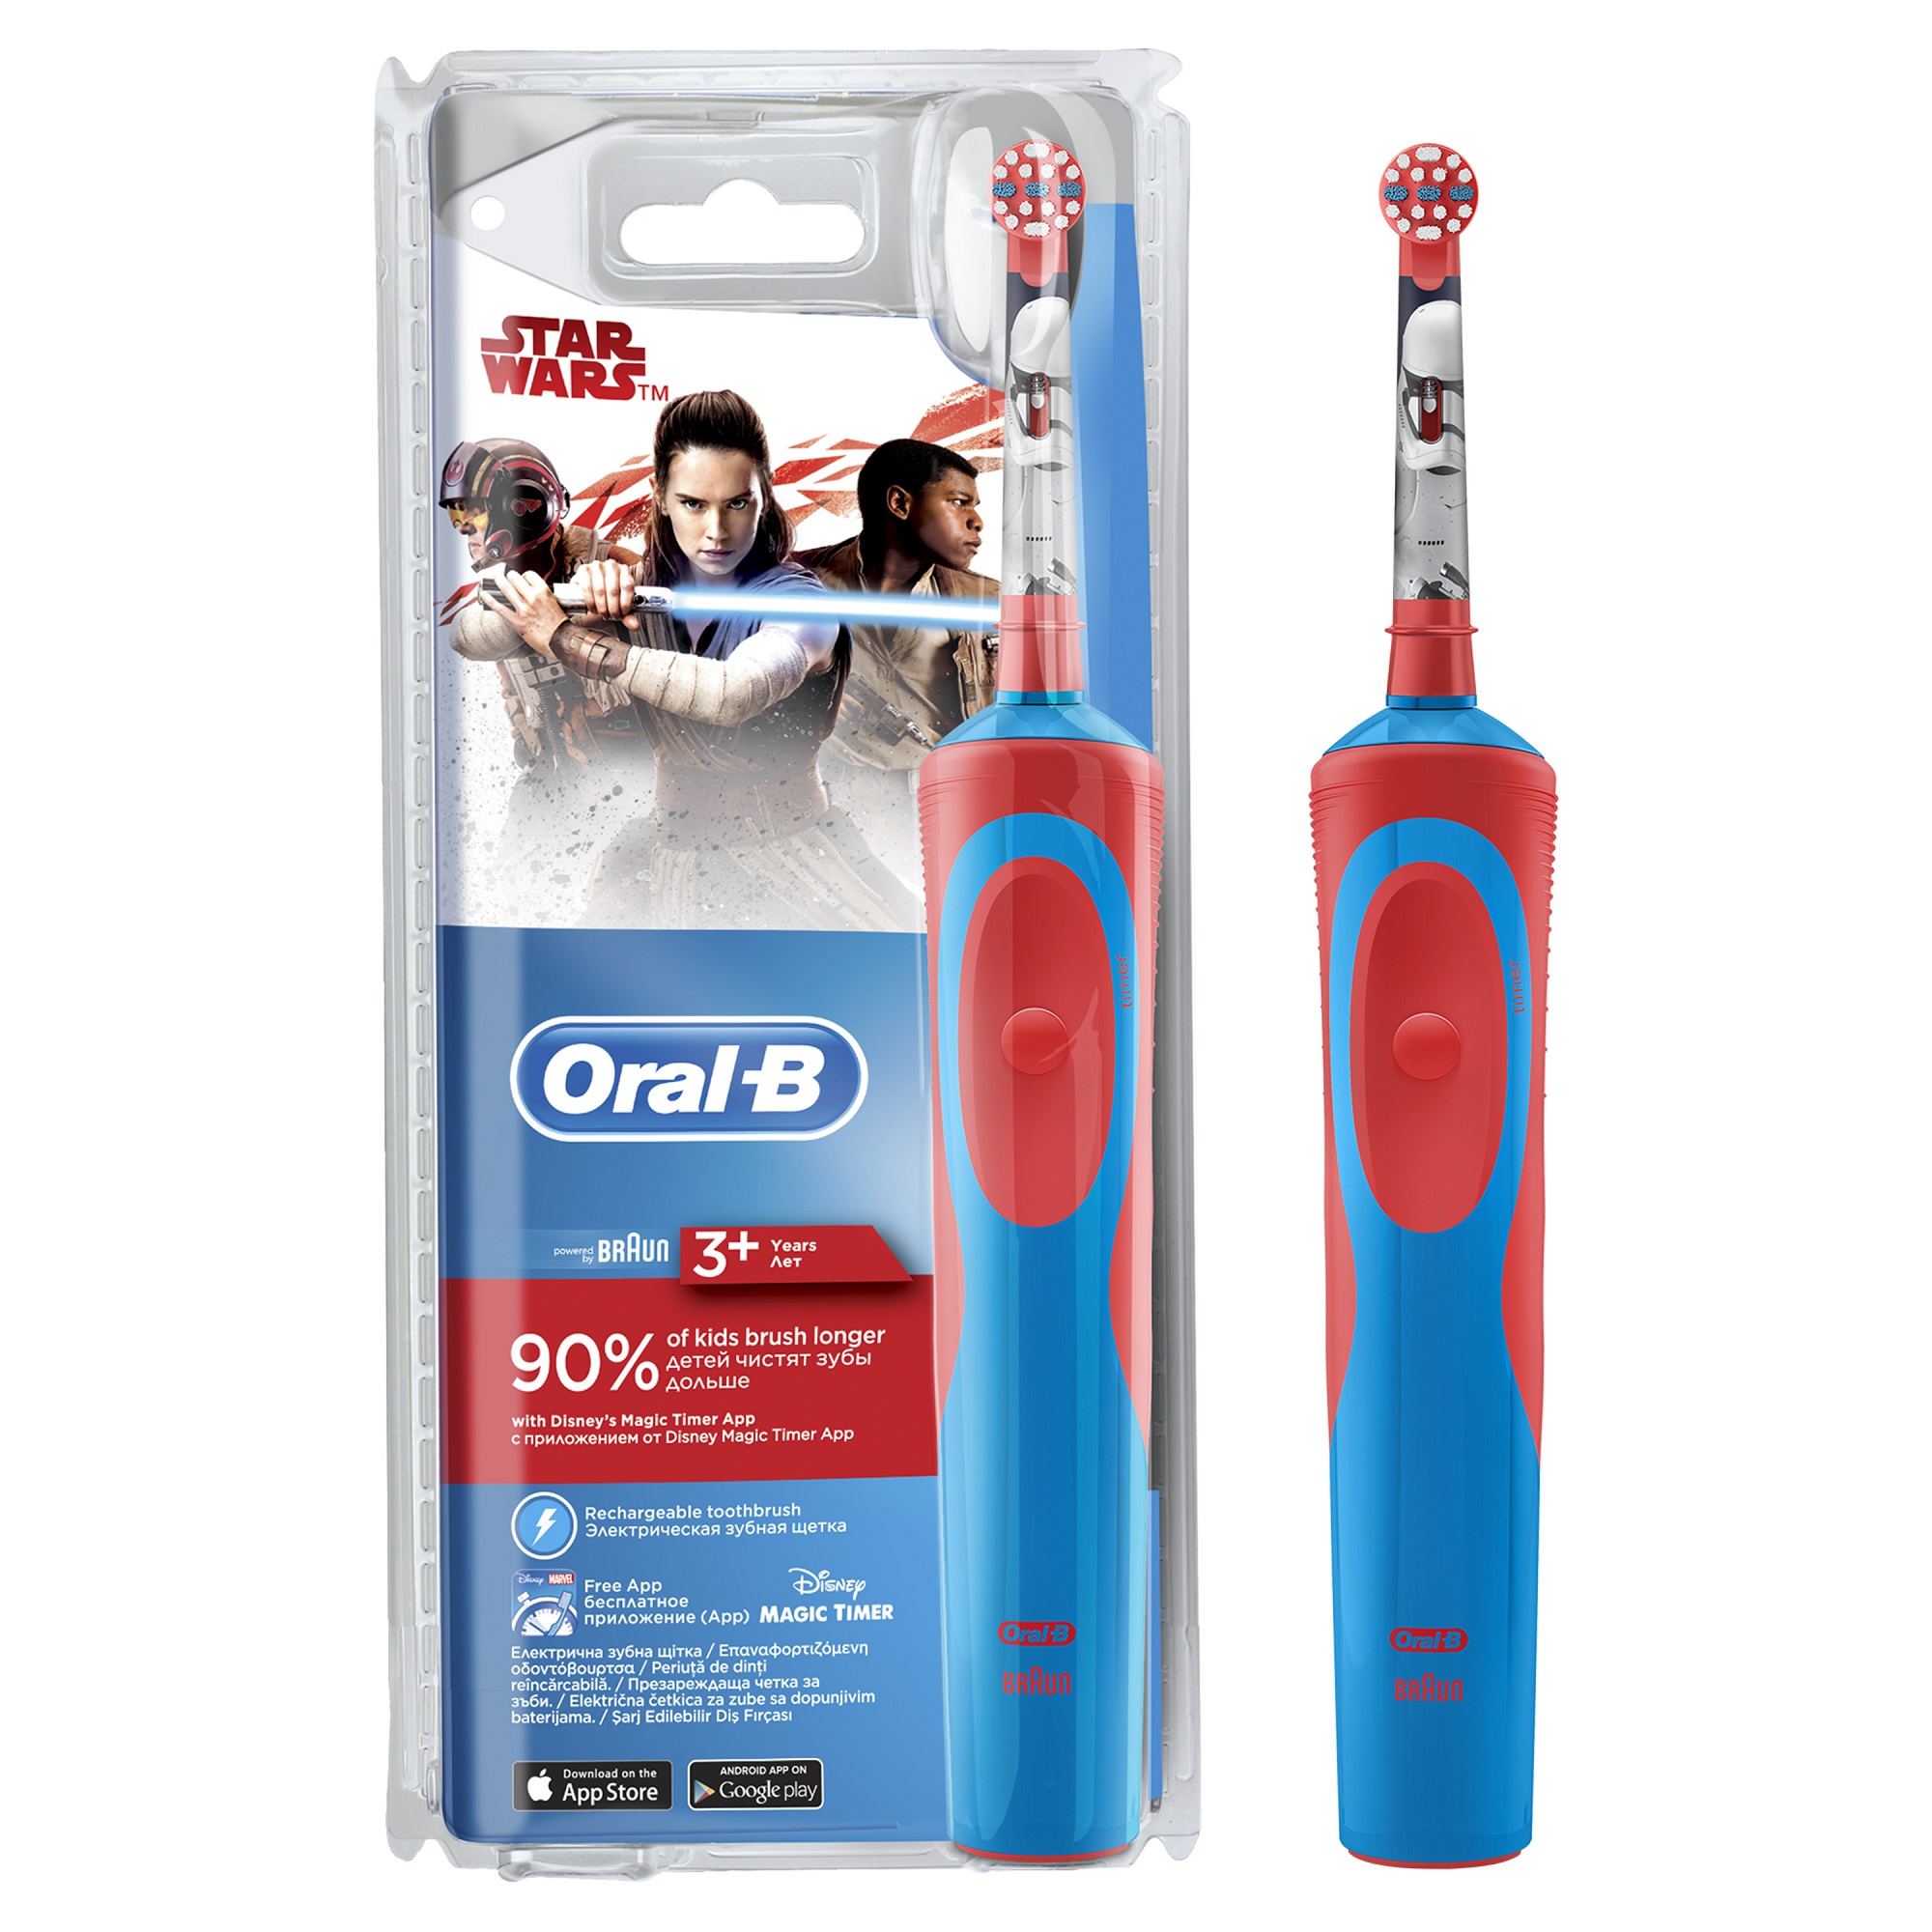 Oral-B Kids Electric Rechargeable Toothbrush with Replacement Refills Star Wars Christmas Gift Pack